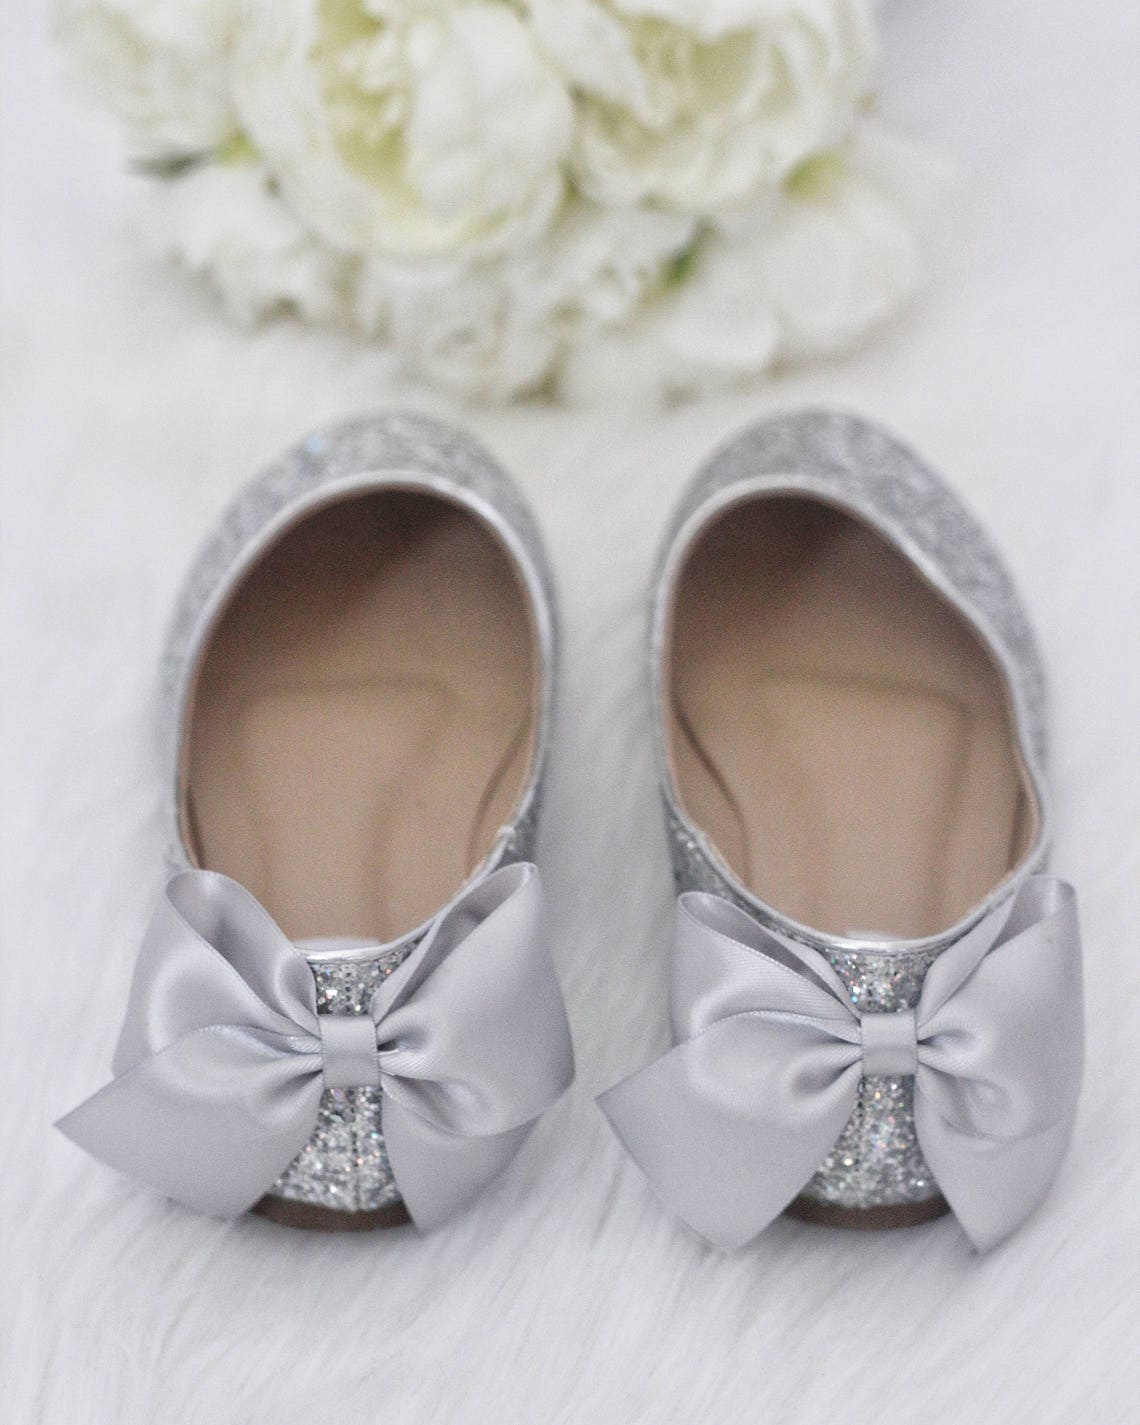 SILVER ROCK GLITTER Flats with Back Satin Bow Bridal Shoes | Etsy